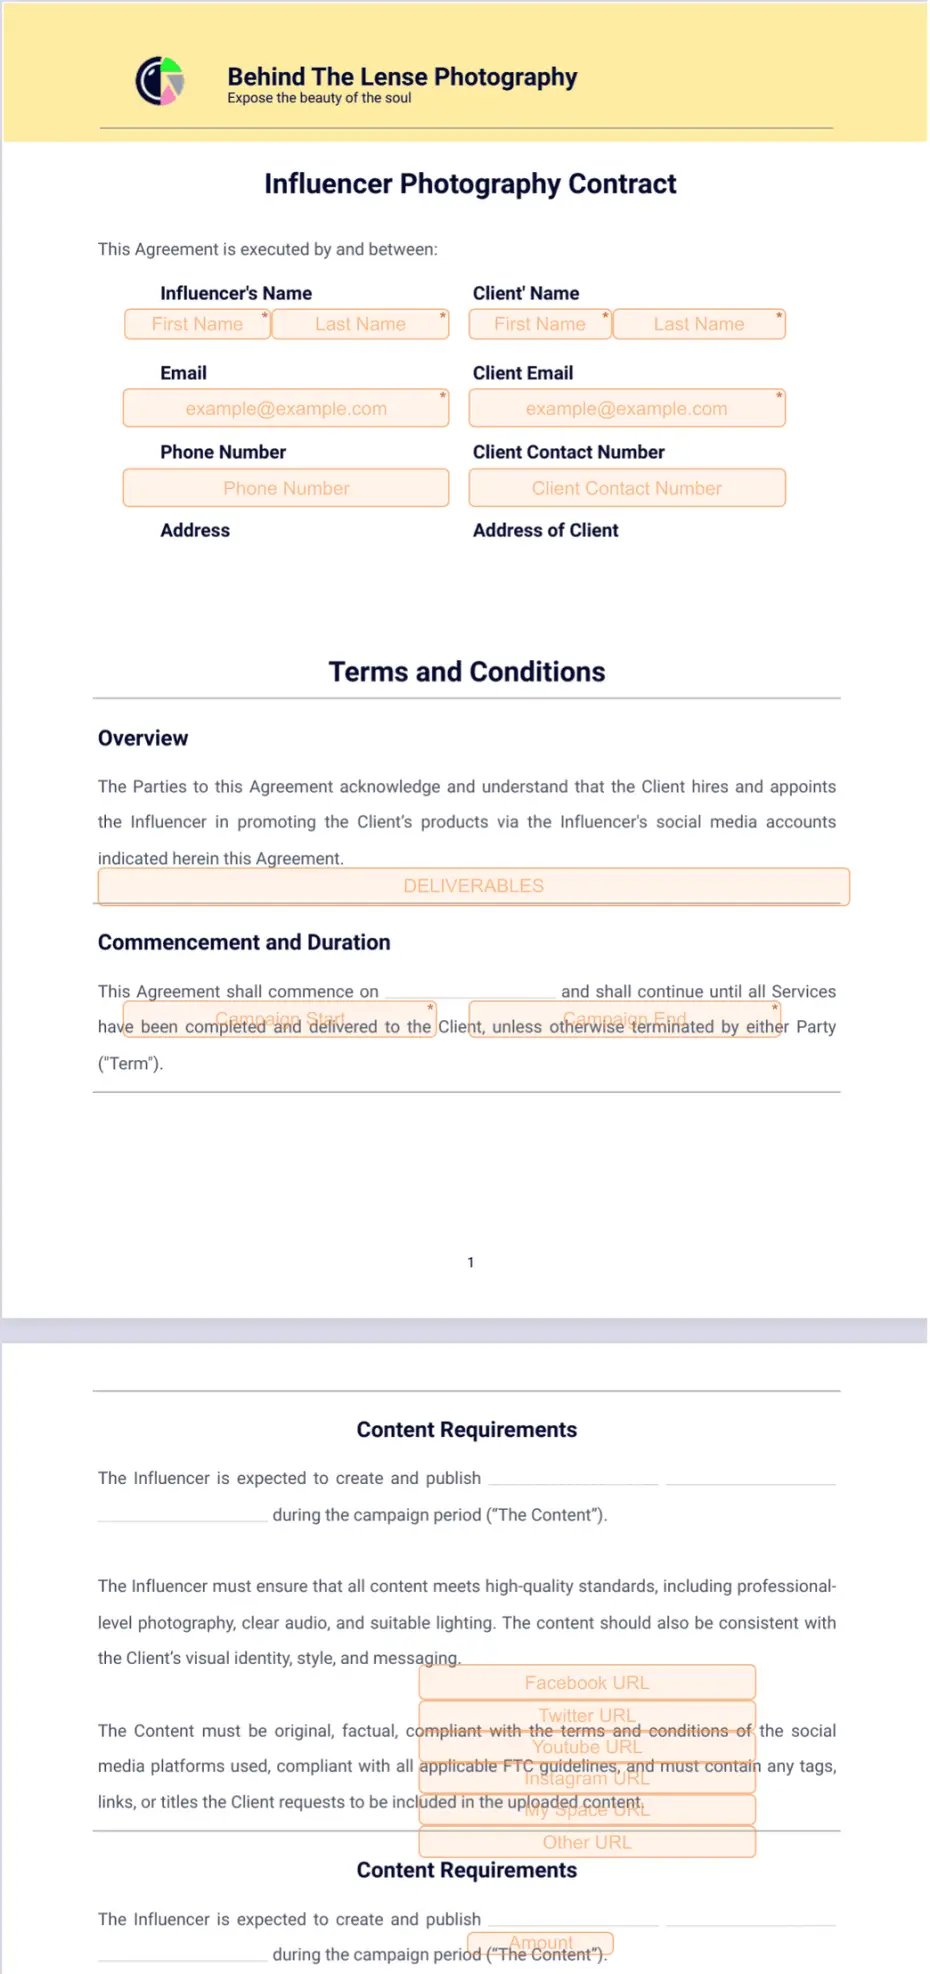 Influencer Photography Contract Template